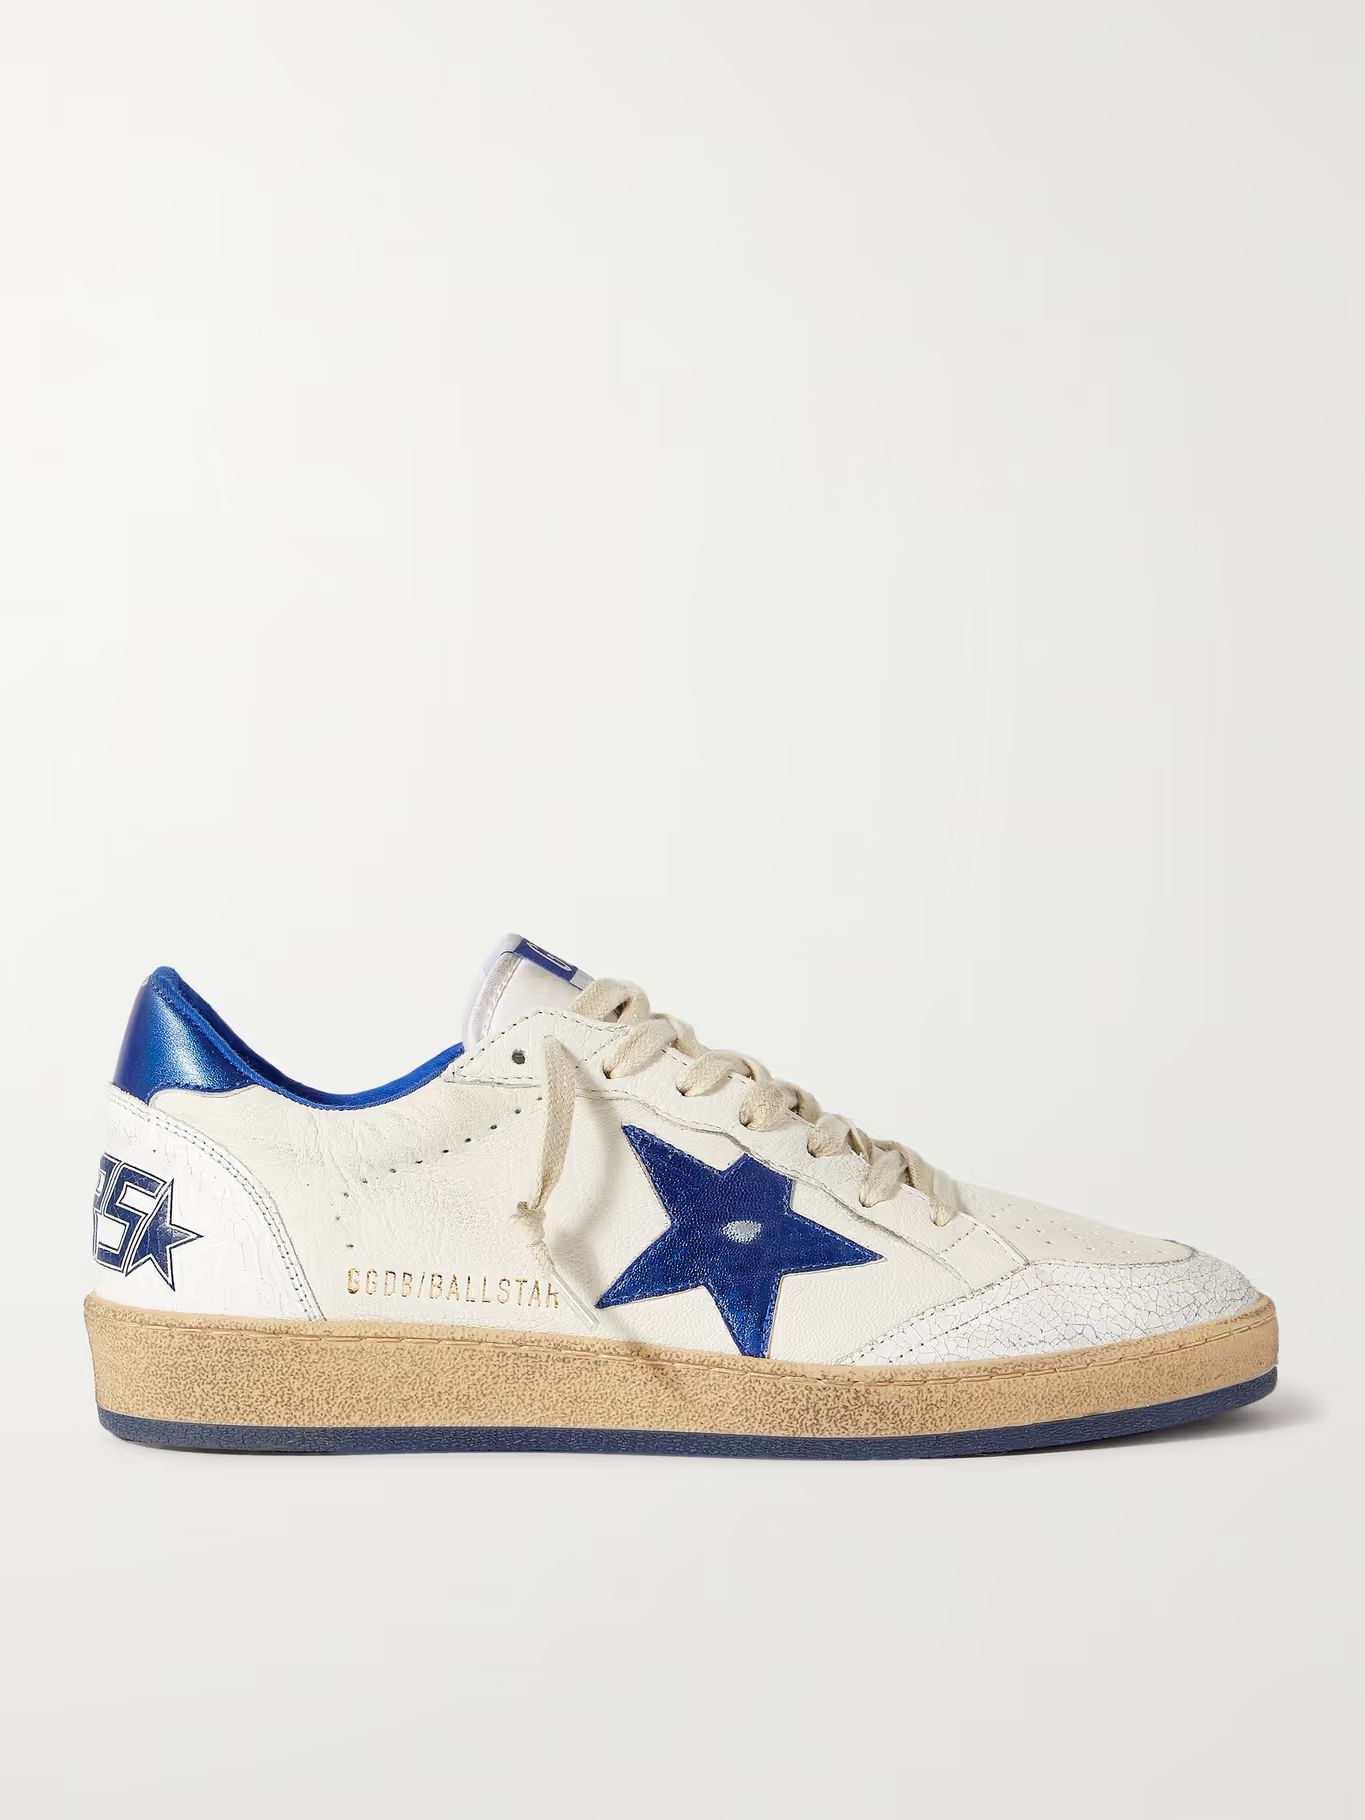 Ball Star Distressed Leather Sneakers | Mr Porter (US & CA)